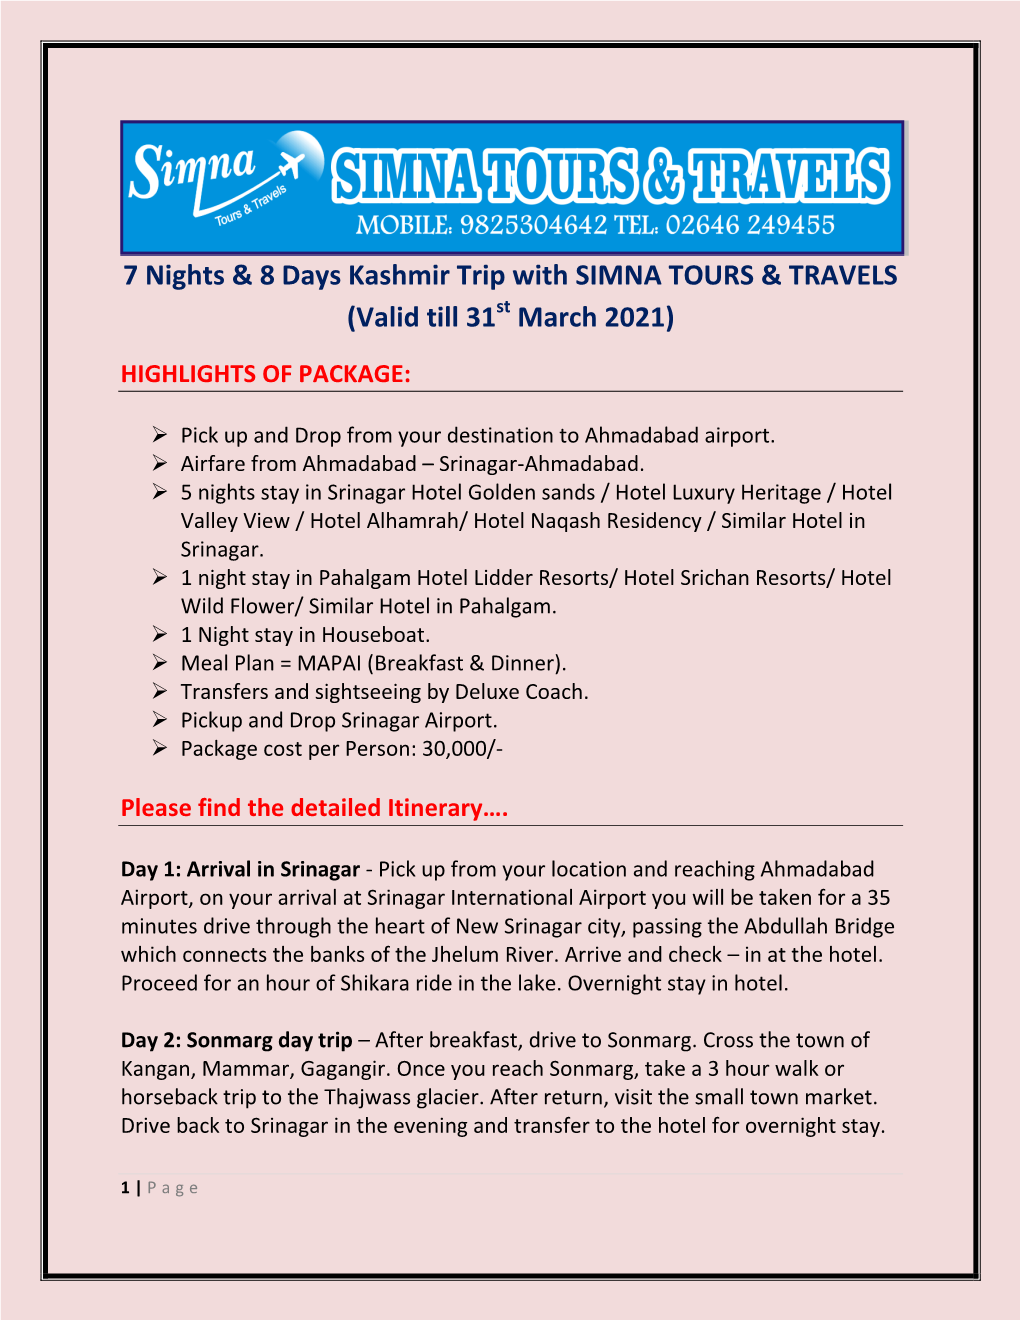 7 Nights & 8 Days Kashmir Trip with SIMNA TOURS & TRAVELS (Valid Till 31 March 2021)